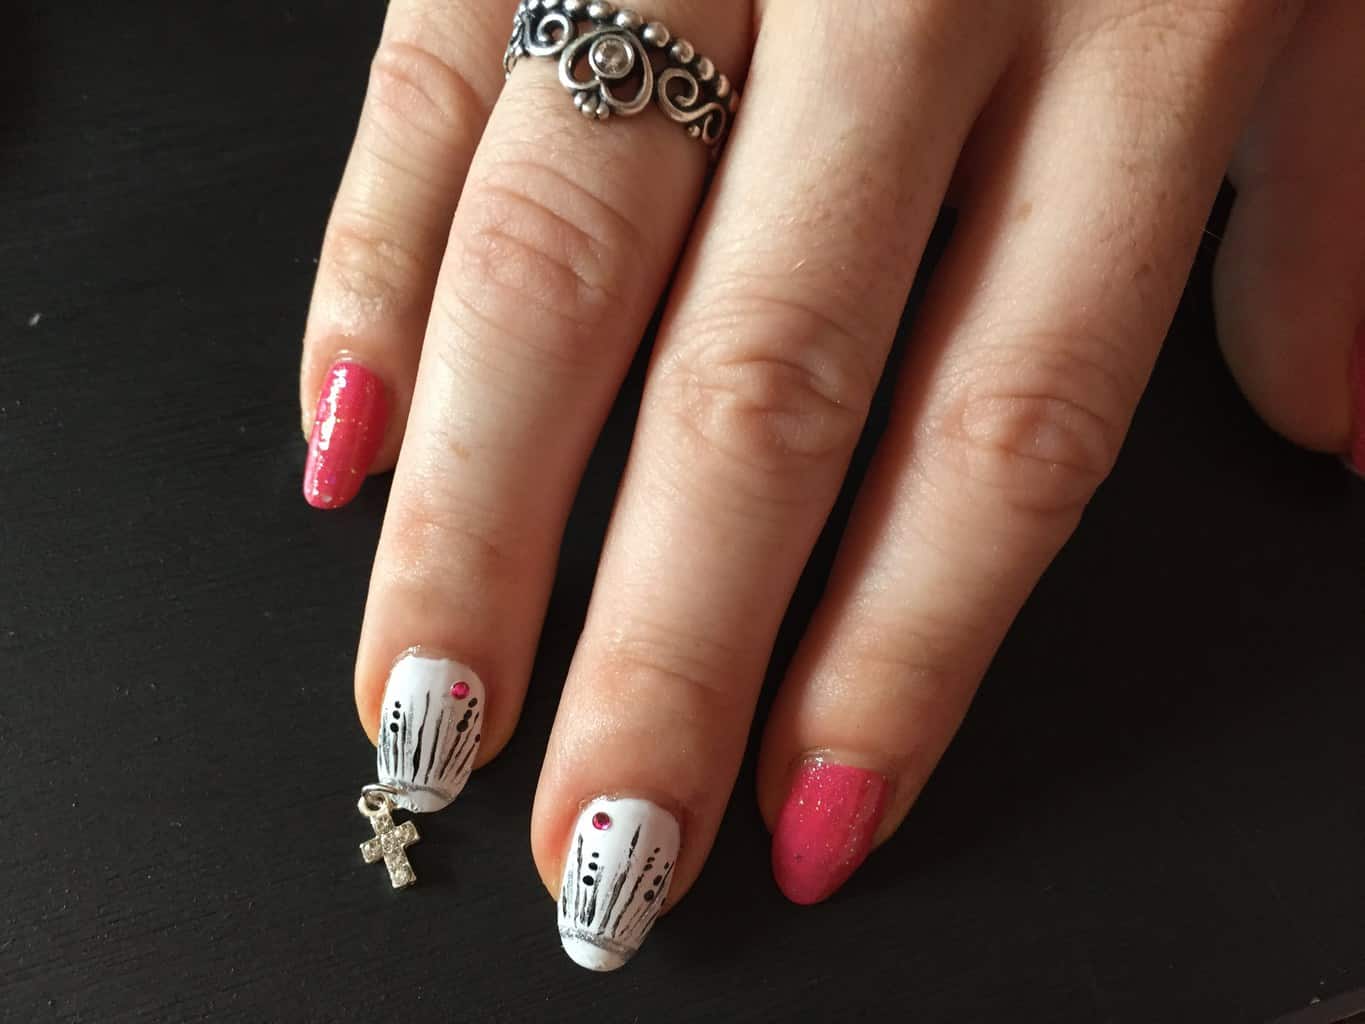 1. Nail Art with Piercing Designs - wide 4